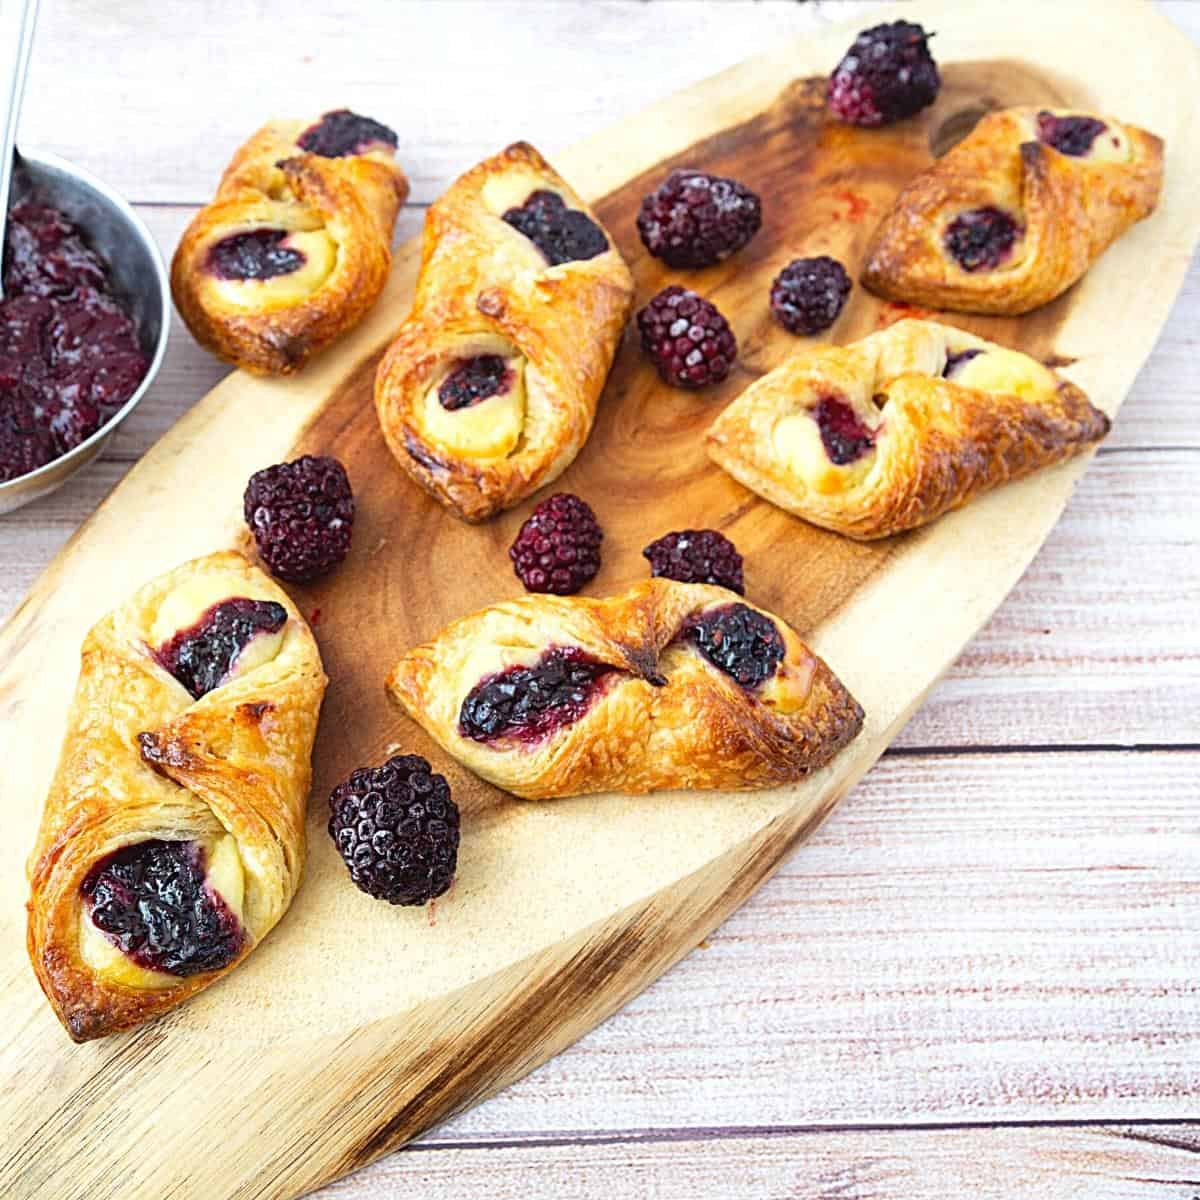 Danish pastry shaped cylinders on a wooden board.